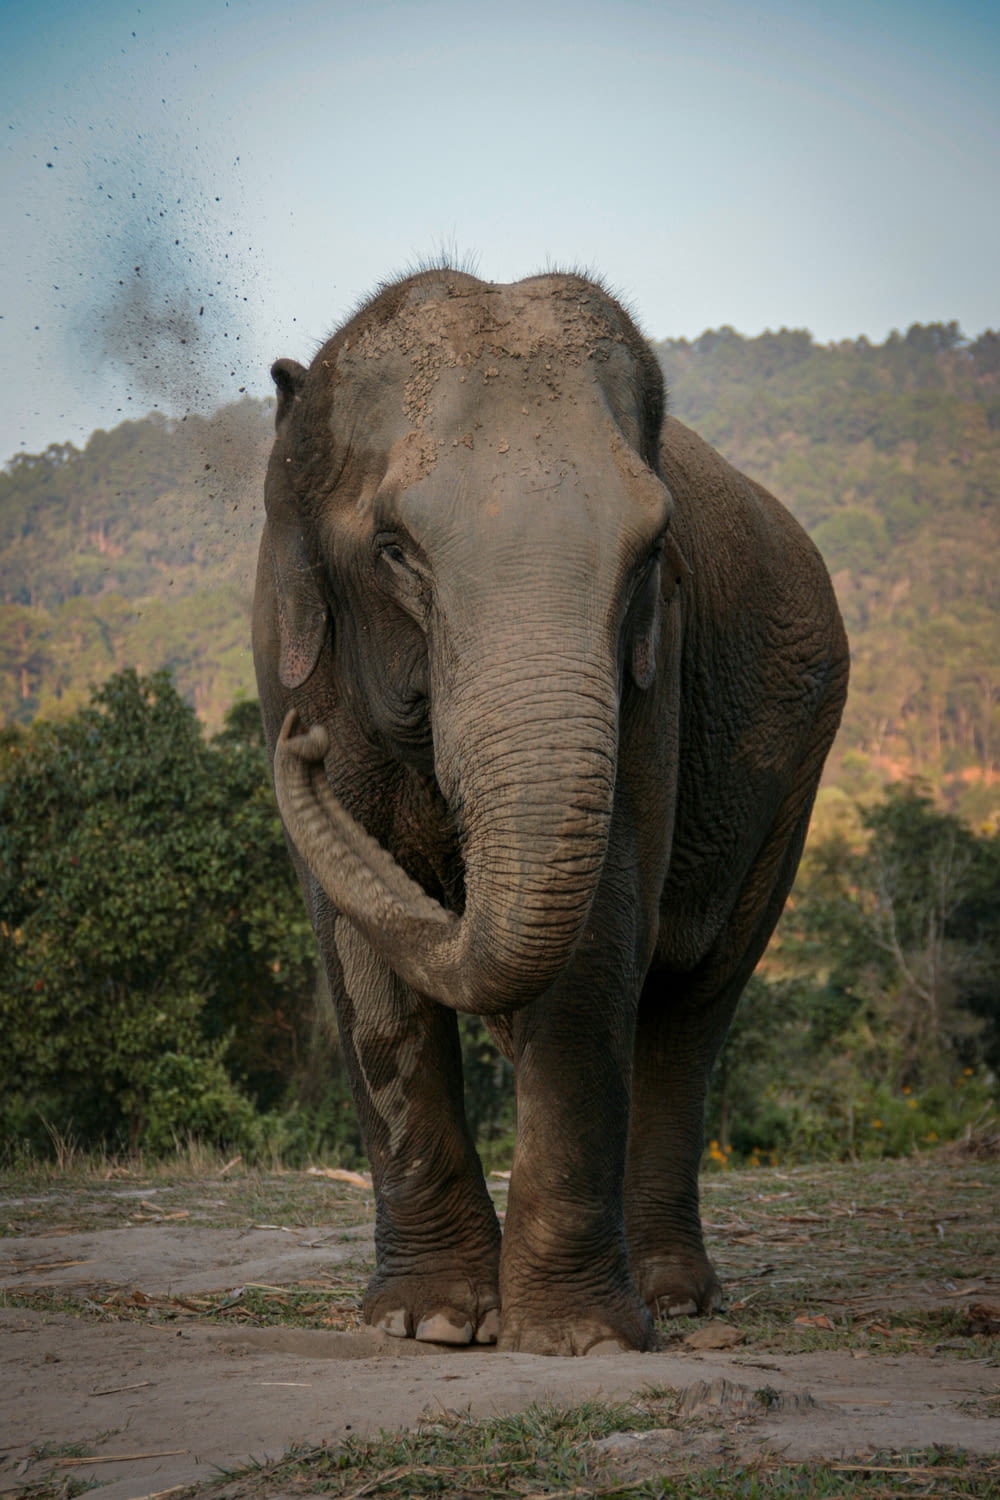 a large elephant standing on top of a dirt field